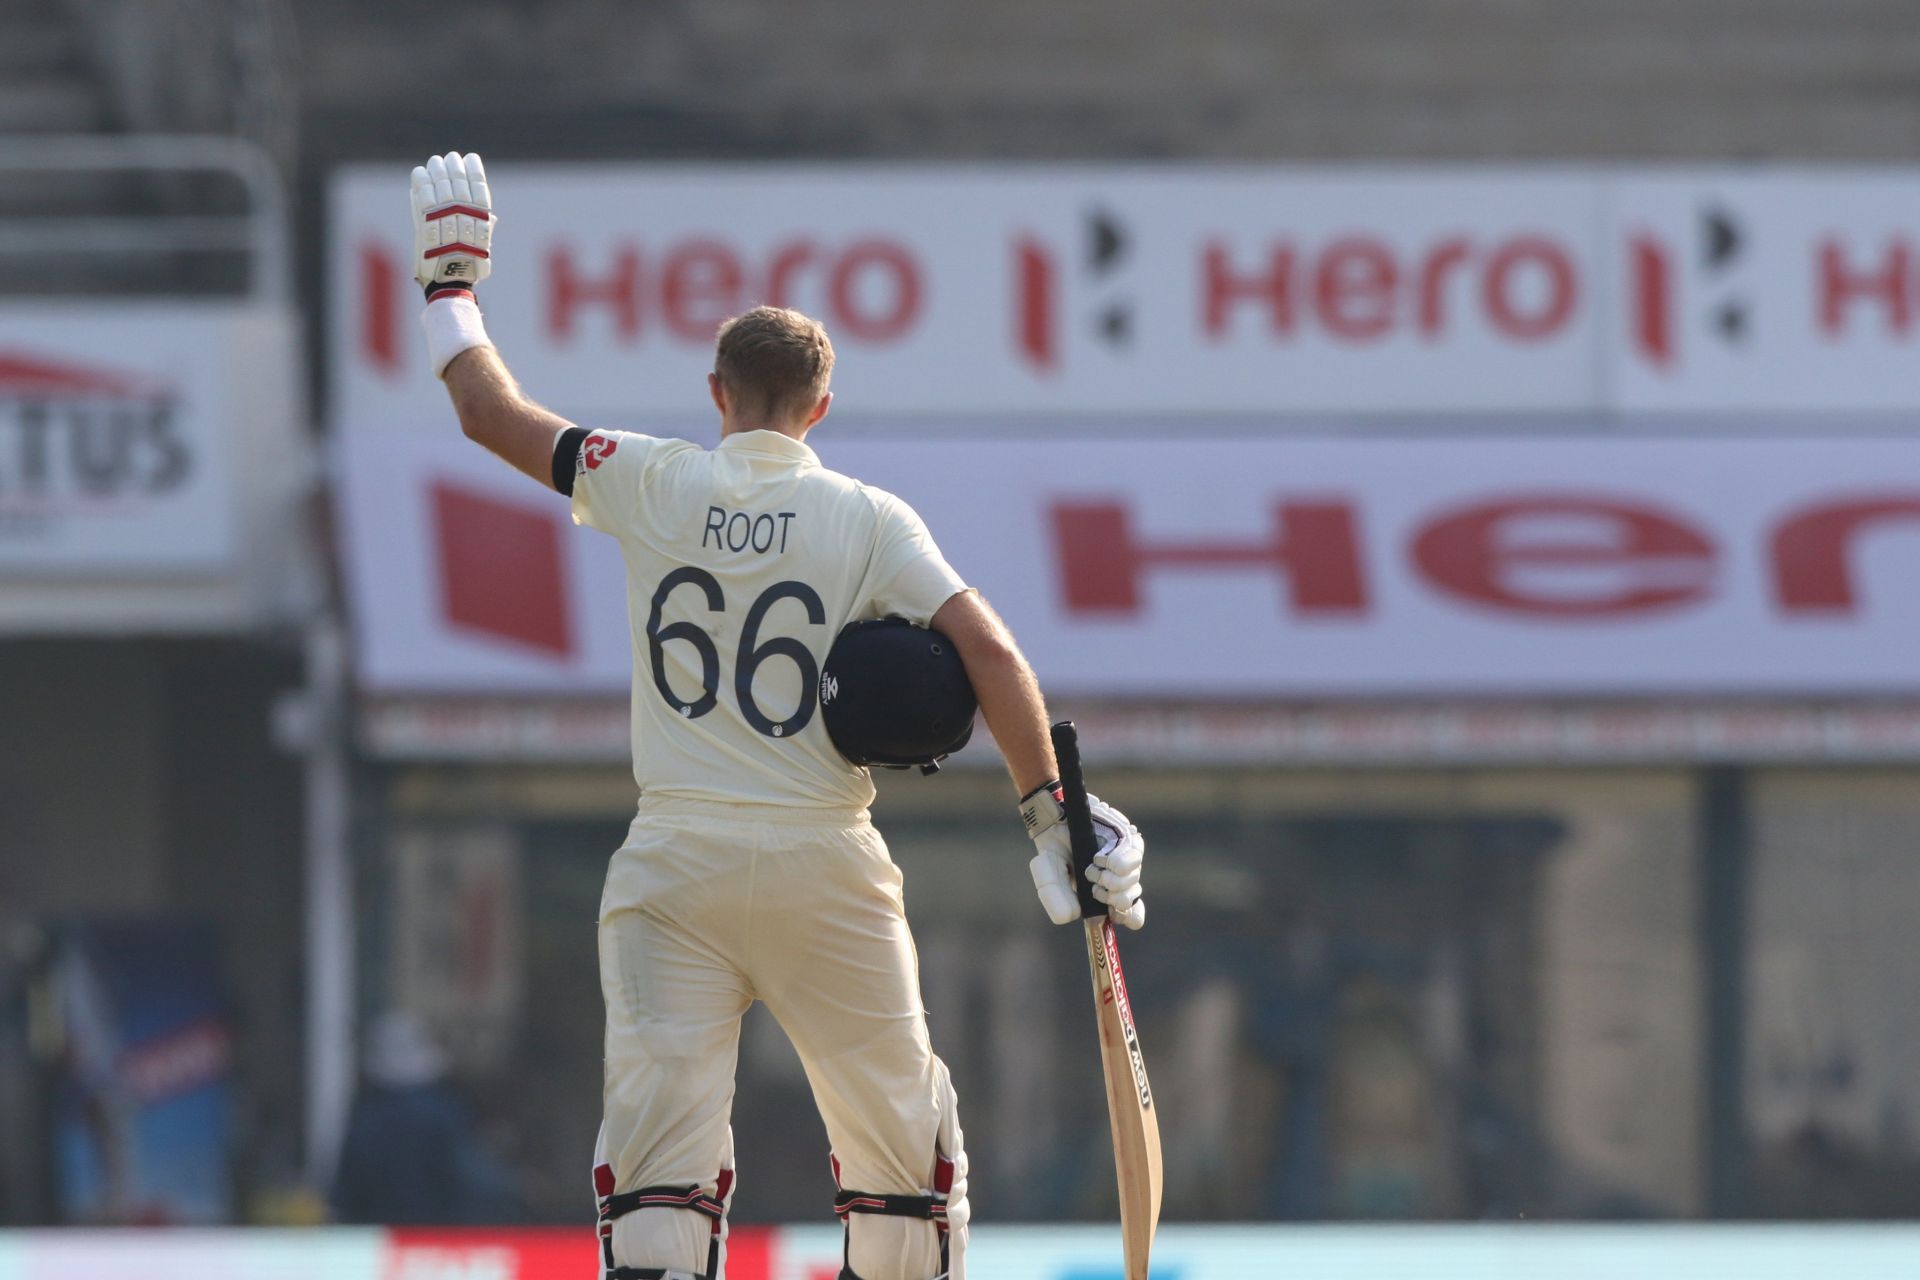 Root made a sensational 218 in Chennai. (Credits: Twitter)